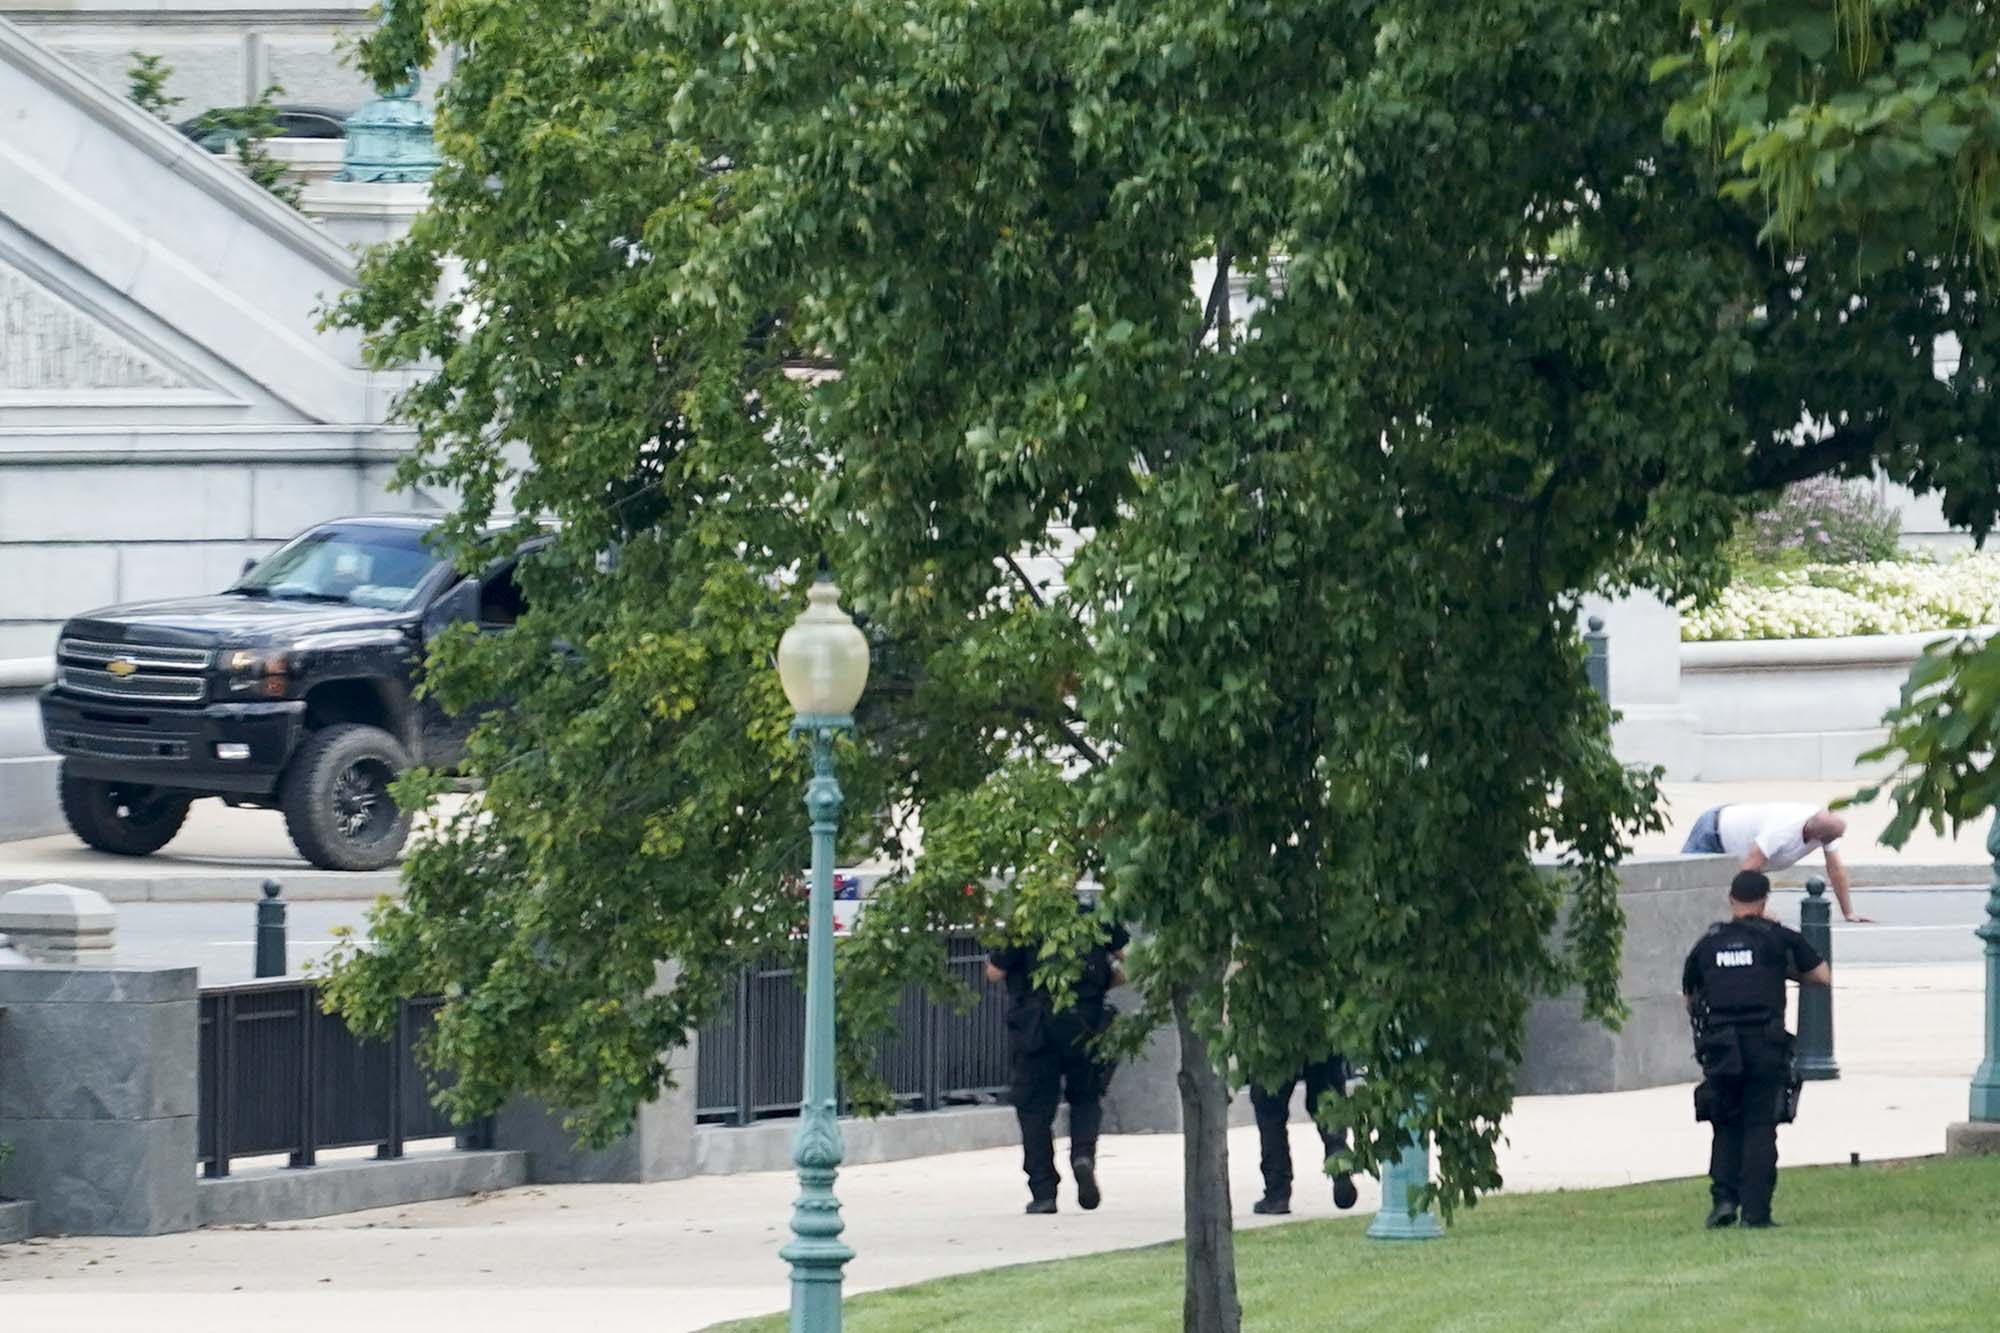 PHOTO: A person is apprehended after being in a pickup truck parked on the sidewalk in front of the Library of Congress' Thomas Jefferson Building, as seen from a window of the U.S. Capitol, Aug. 19, 2021.